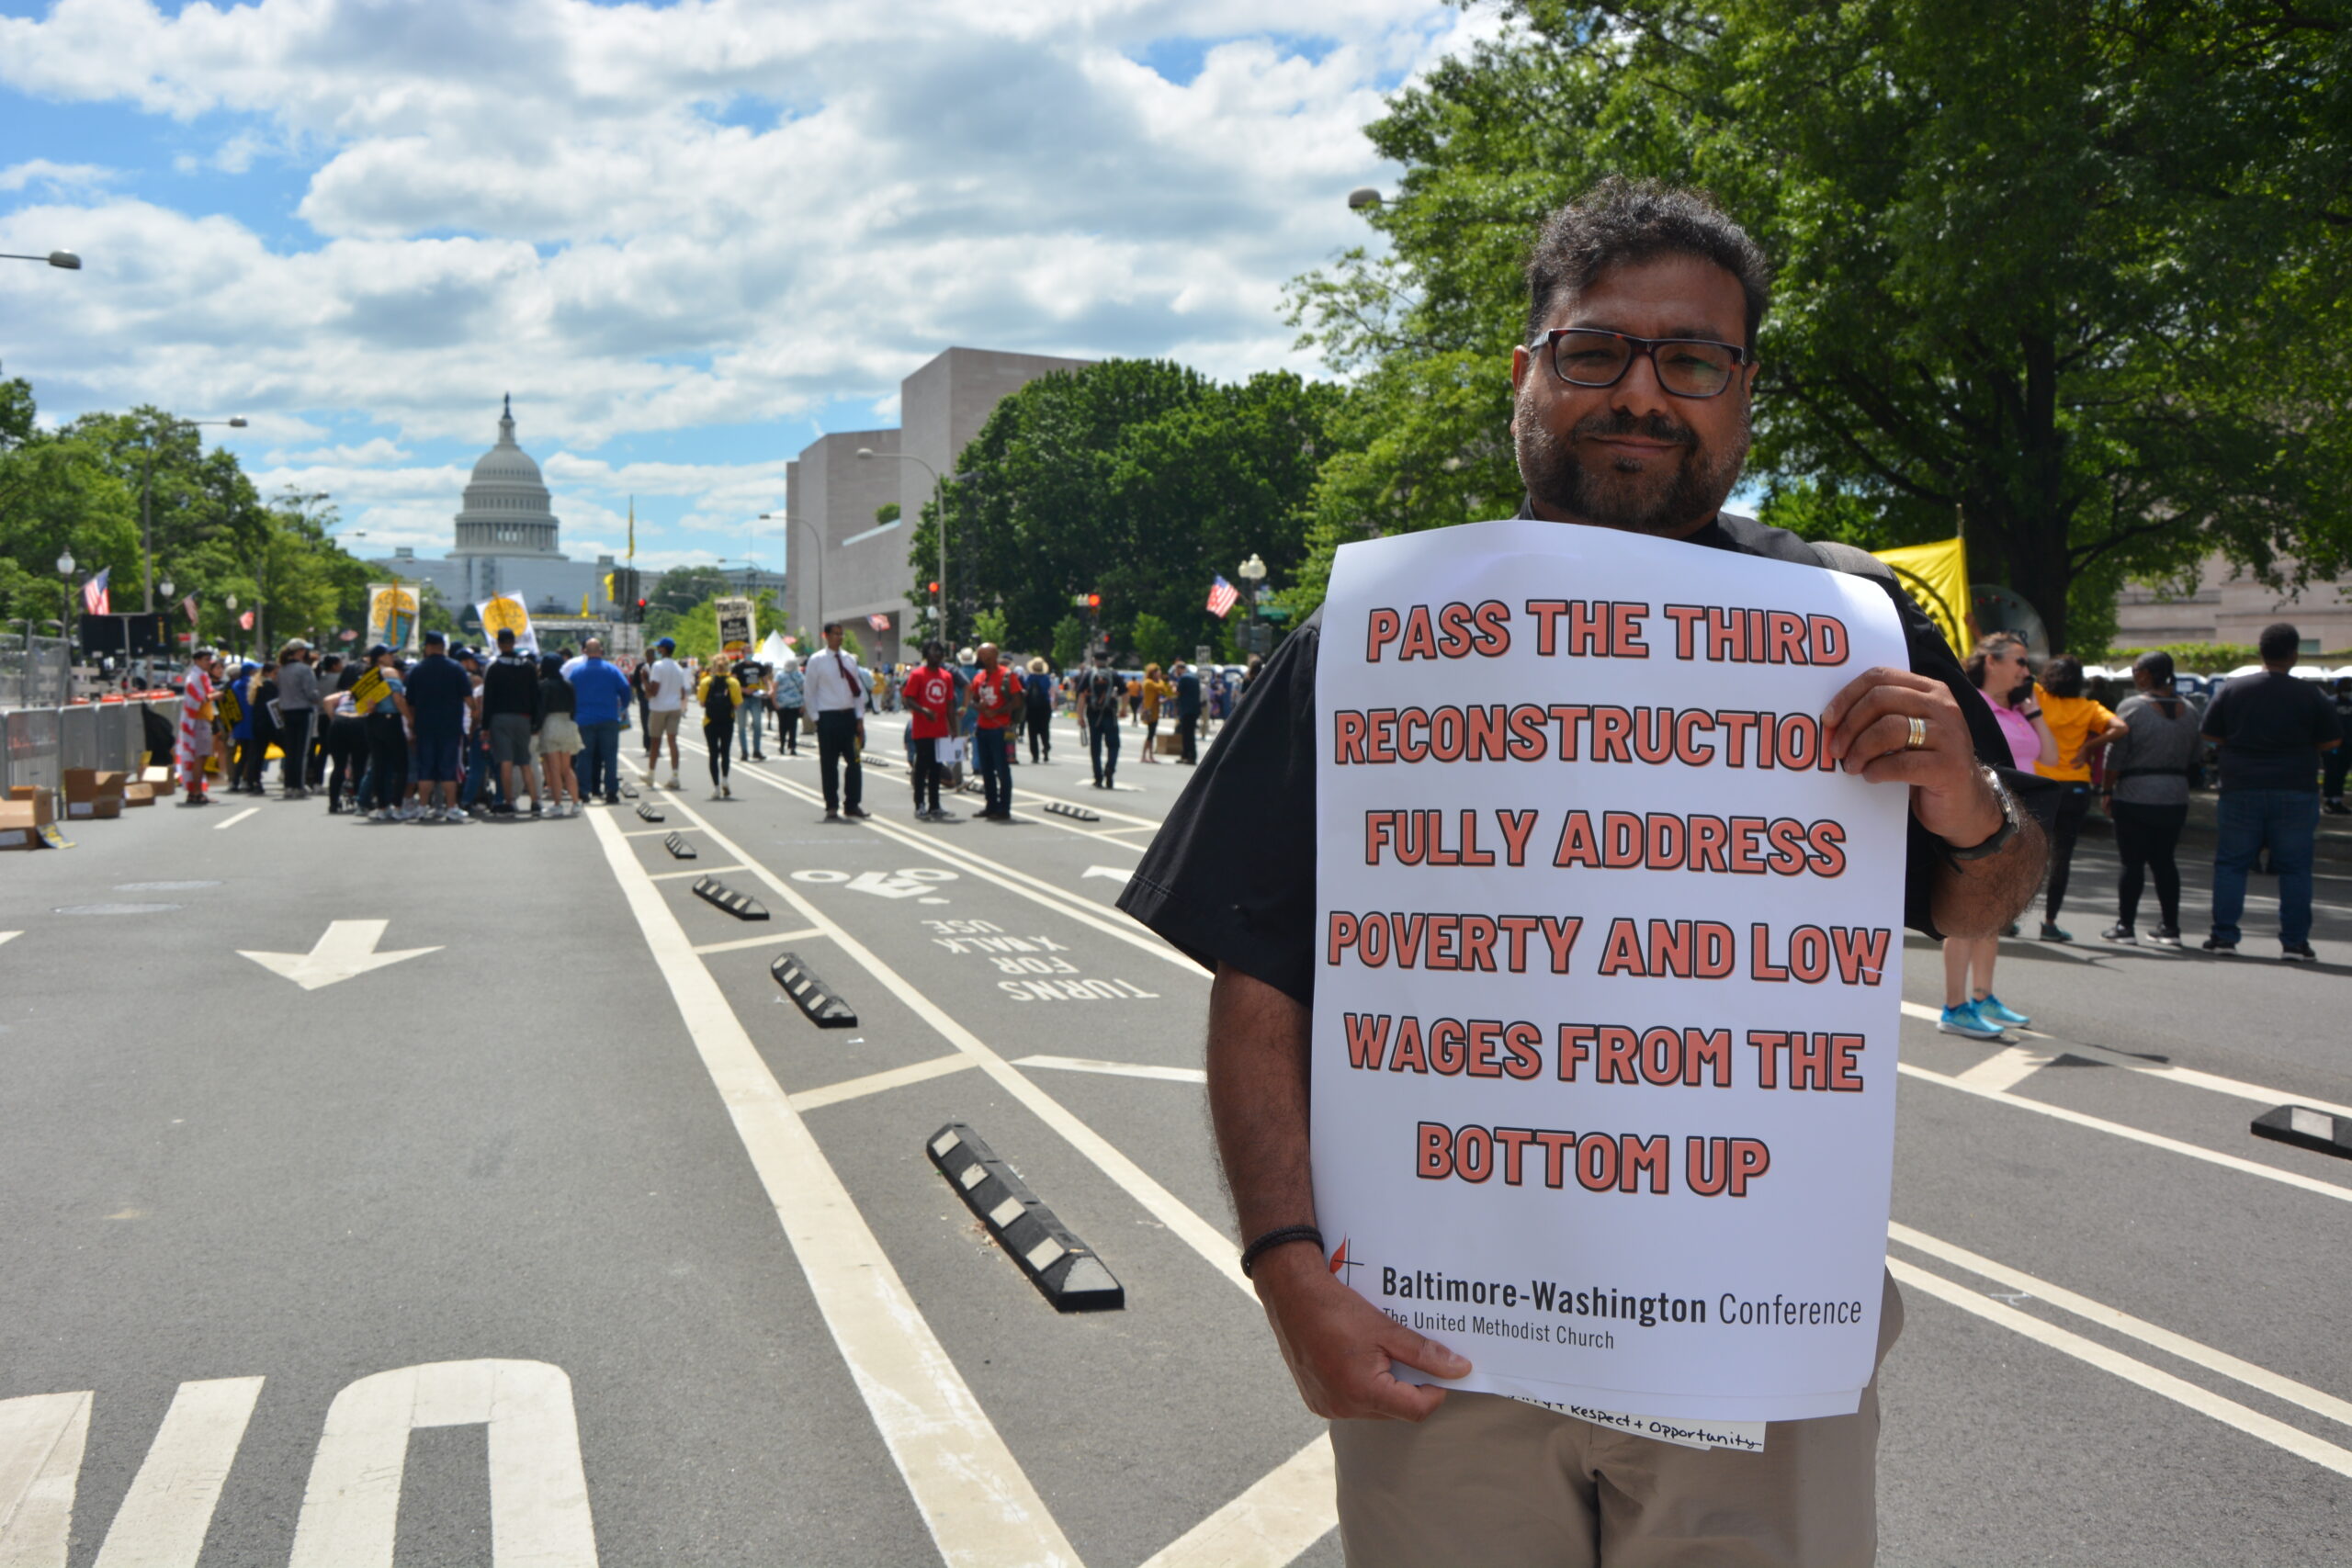 The Rev. Neal Christie, a United Methodist Minister, attends the Poor People's Campaign's "Mass Poor People’s and Low-Wage Workers’ Assembly and Moral March in Washington" on June 18, 2022.